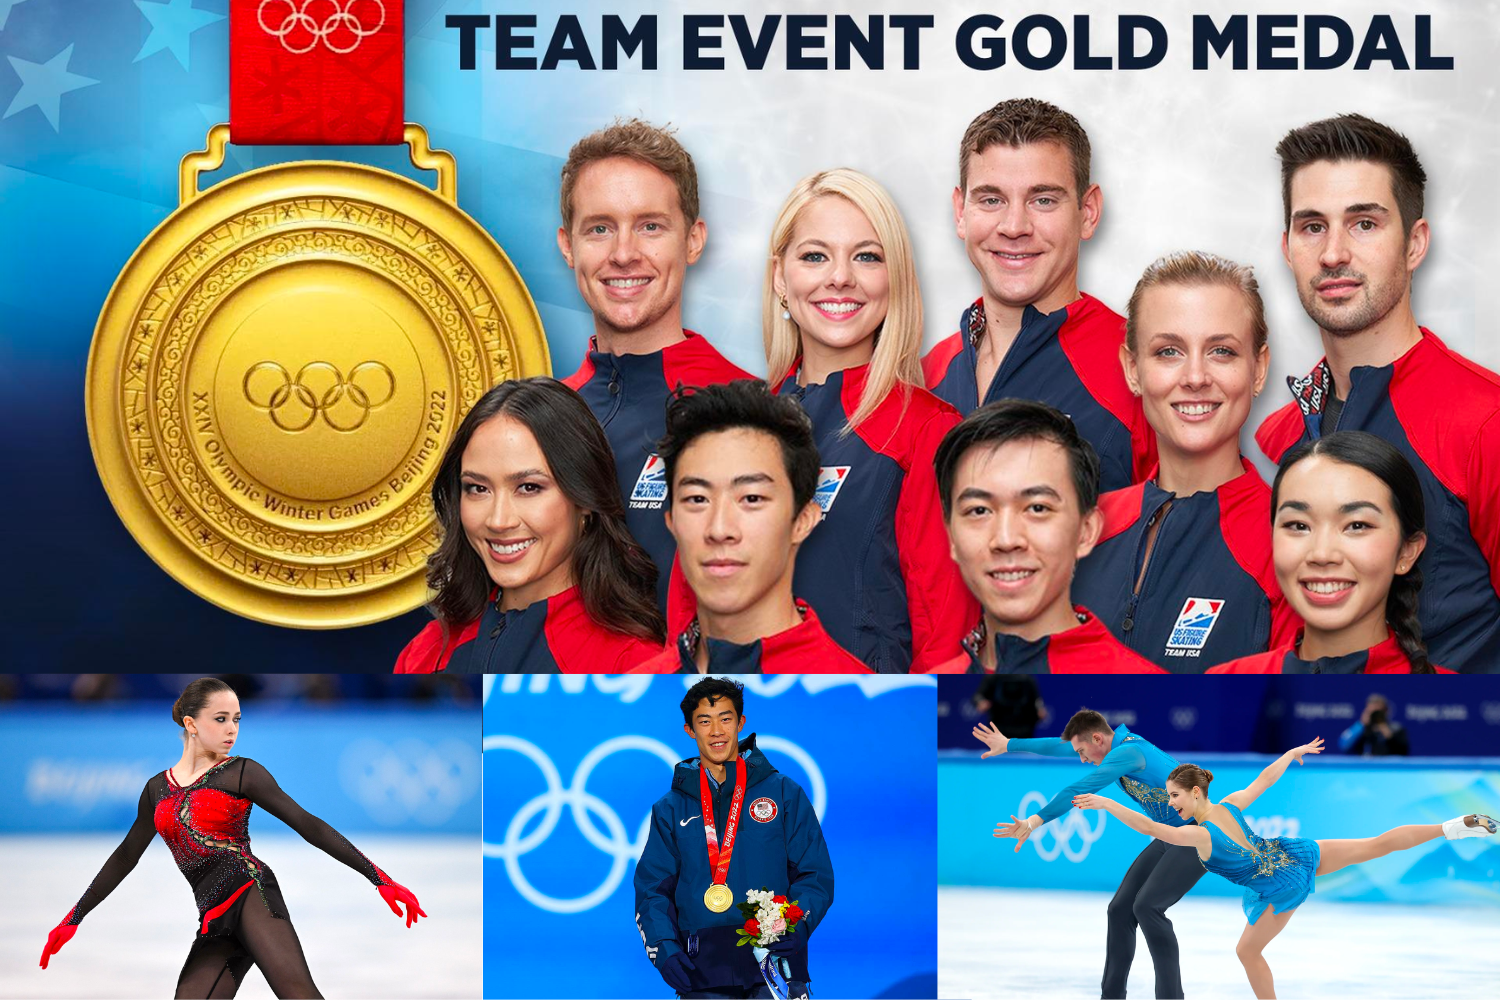 In a turn of events, the 2022 U.S. Olympic figure skating team has marked their names in history as the first U.S. figure skating group to receive the Olympic gold medal.